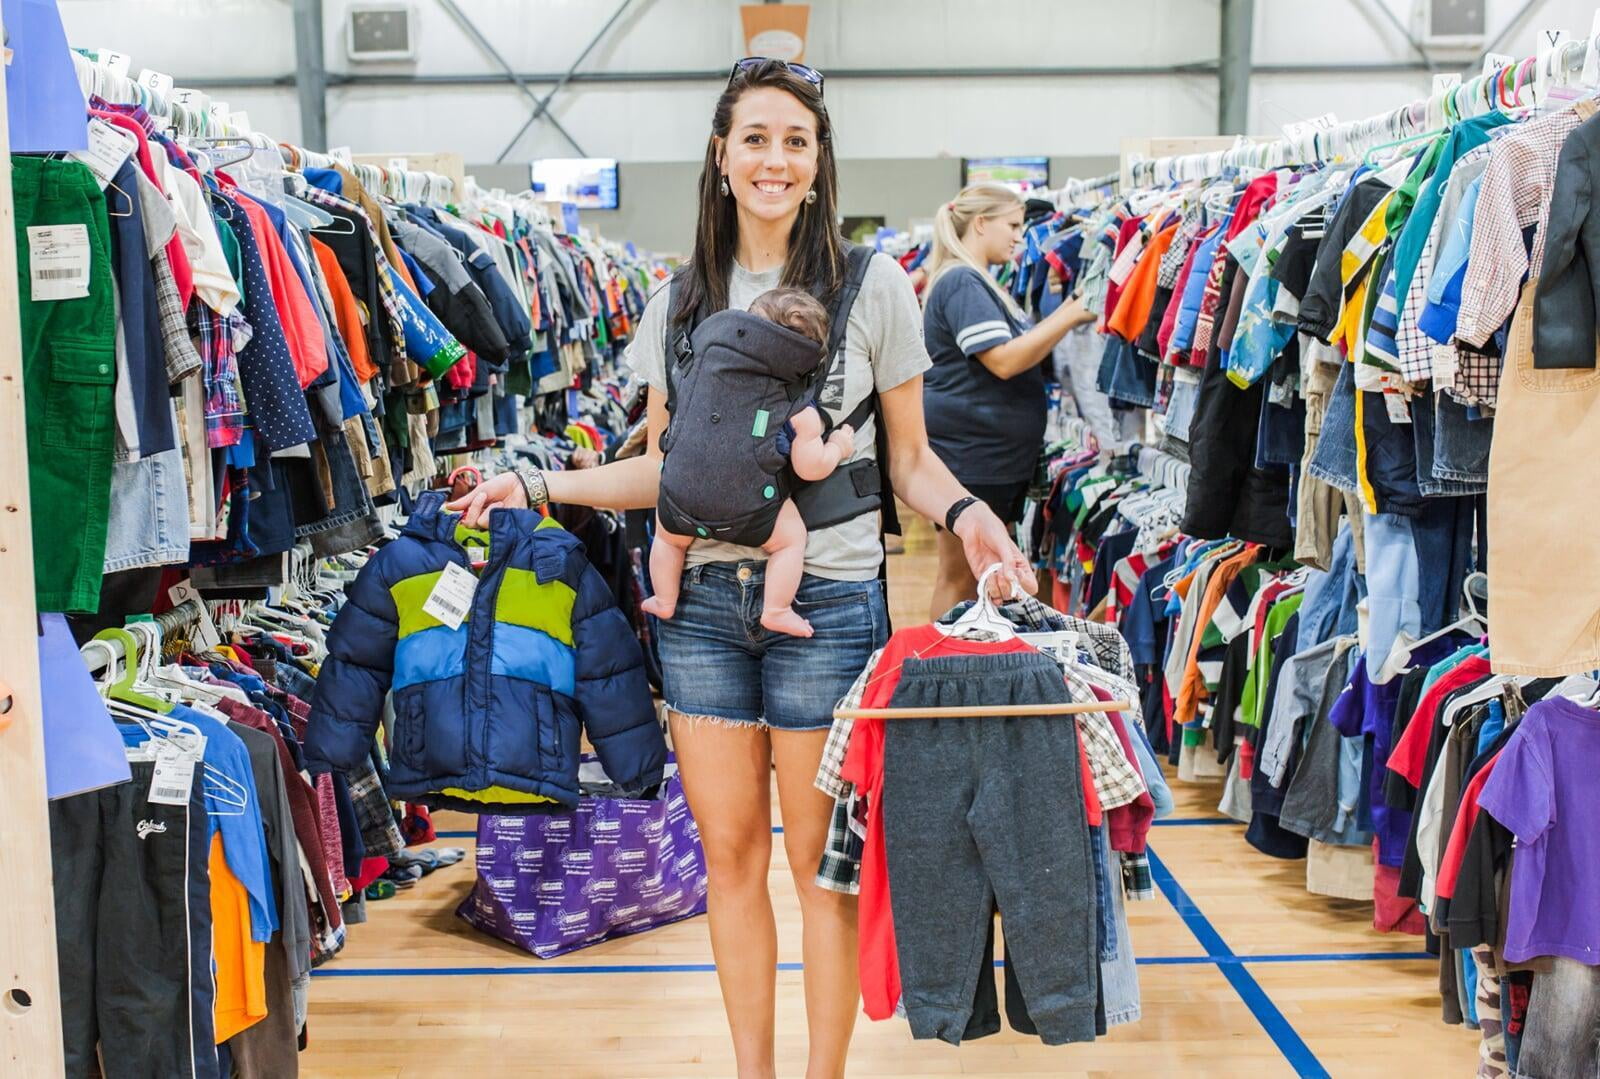 A young JBF shopper mom in a black Metallica T-shirt holds an outfit she intends to buy at her local JBF sale.